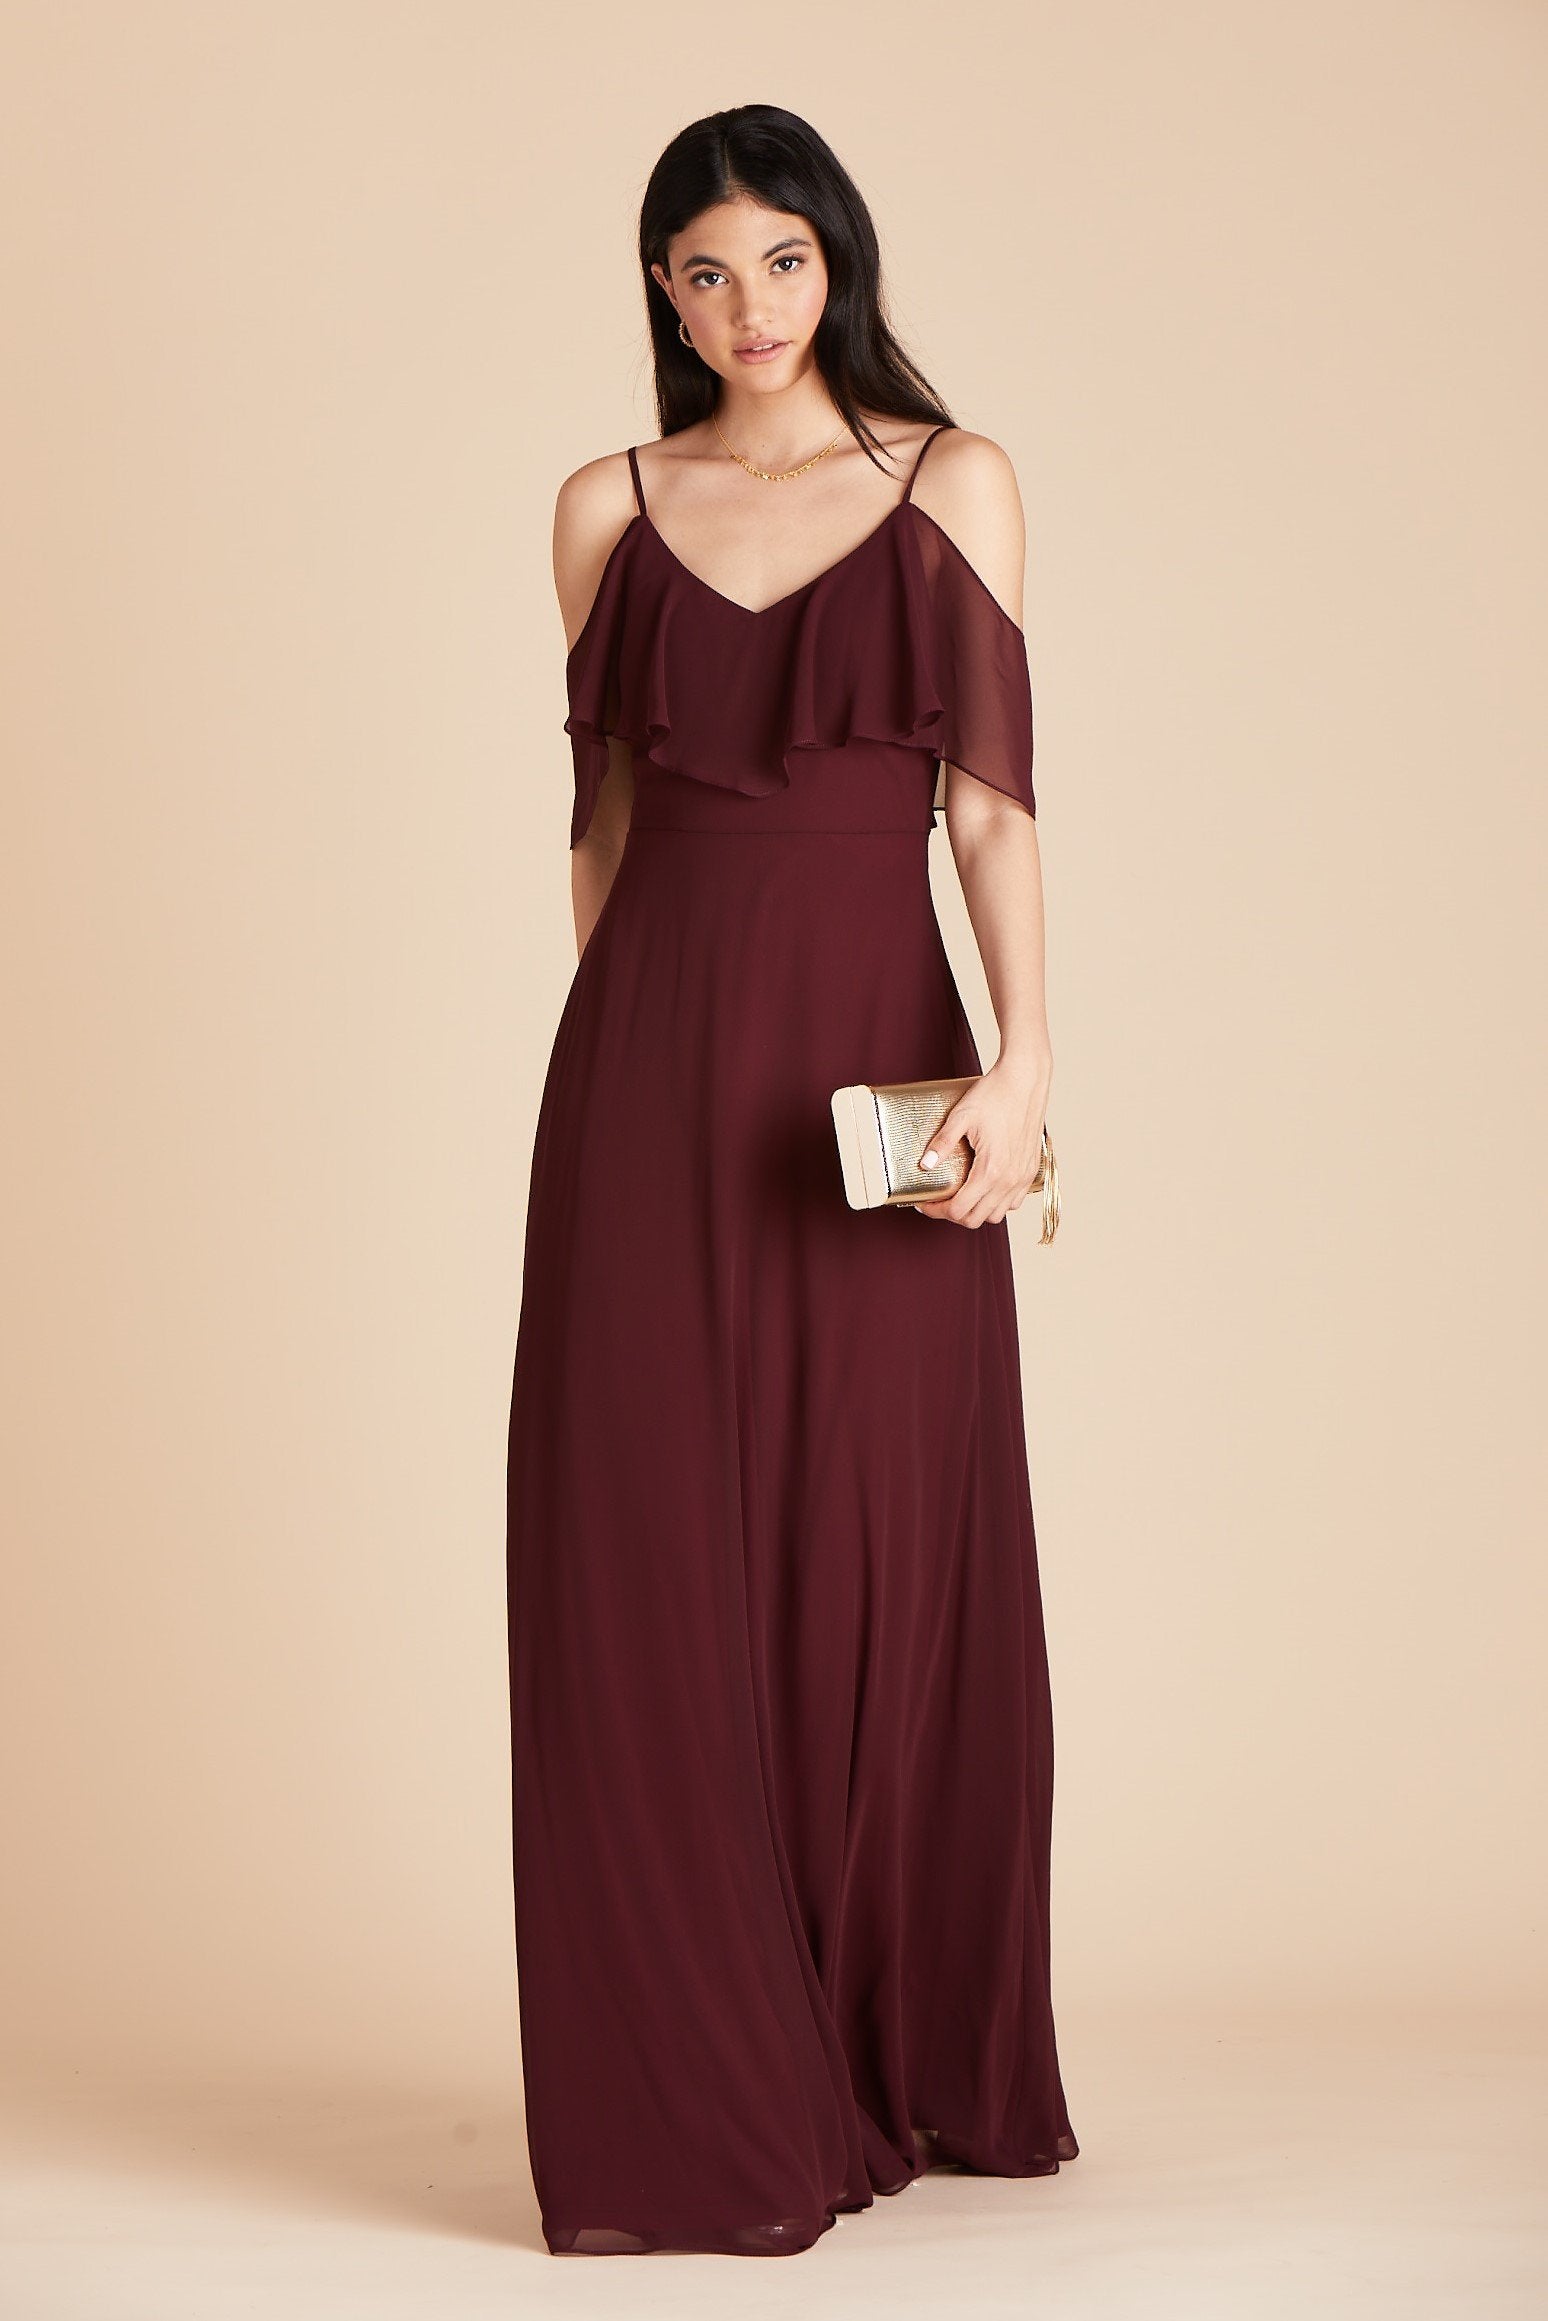 Jane convertible bridesmaid dress in cabernet burgundy chiffon by Birdy Grey, front view